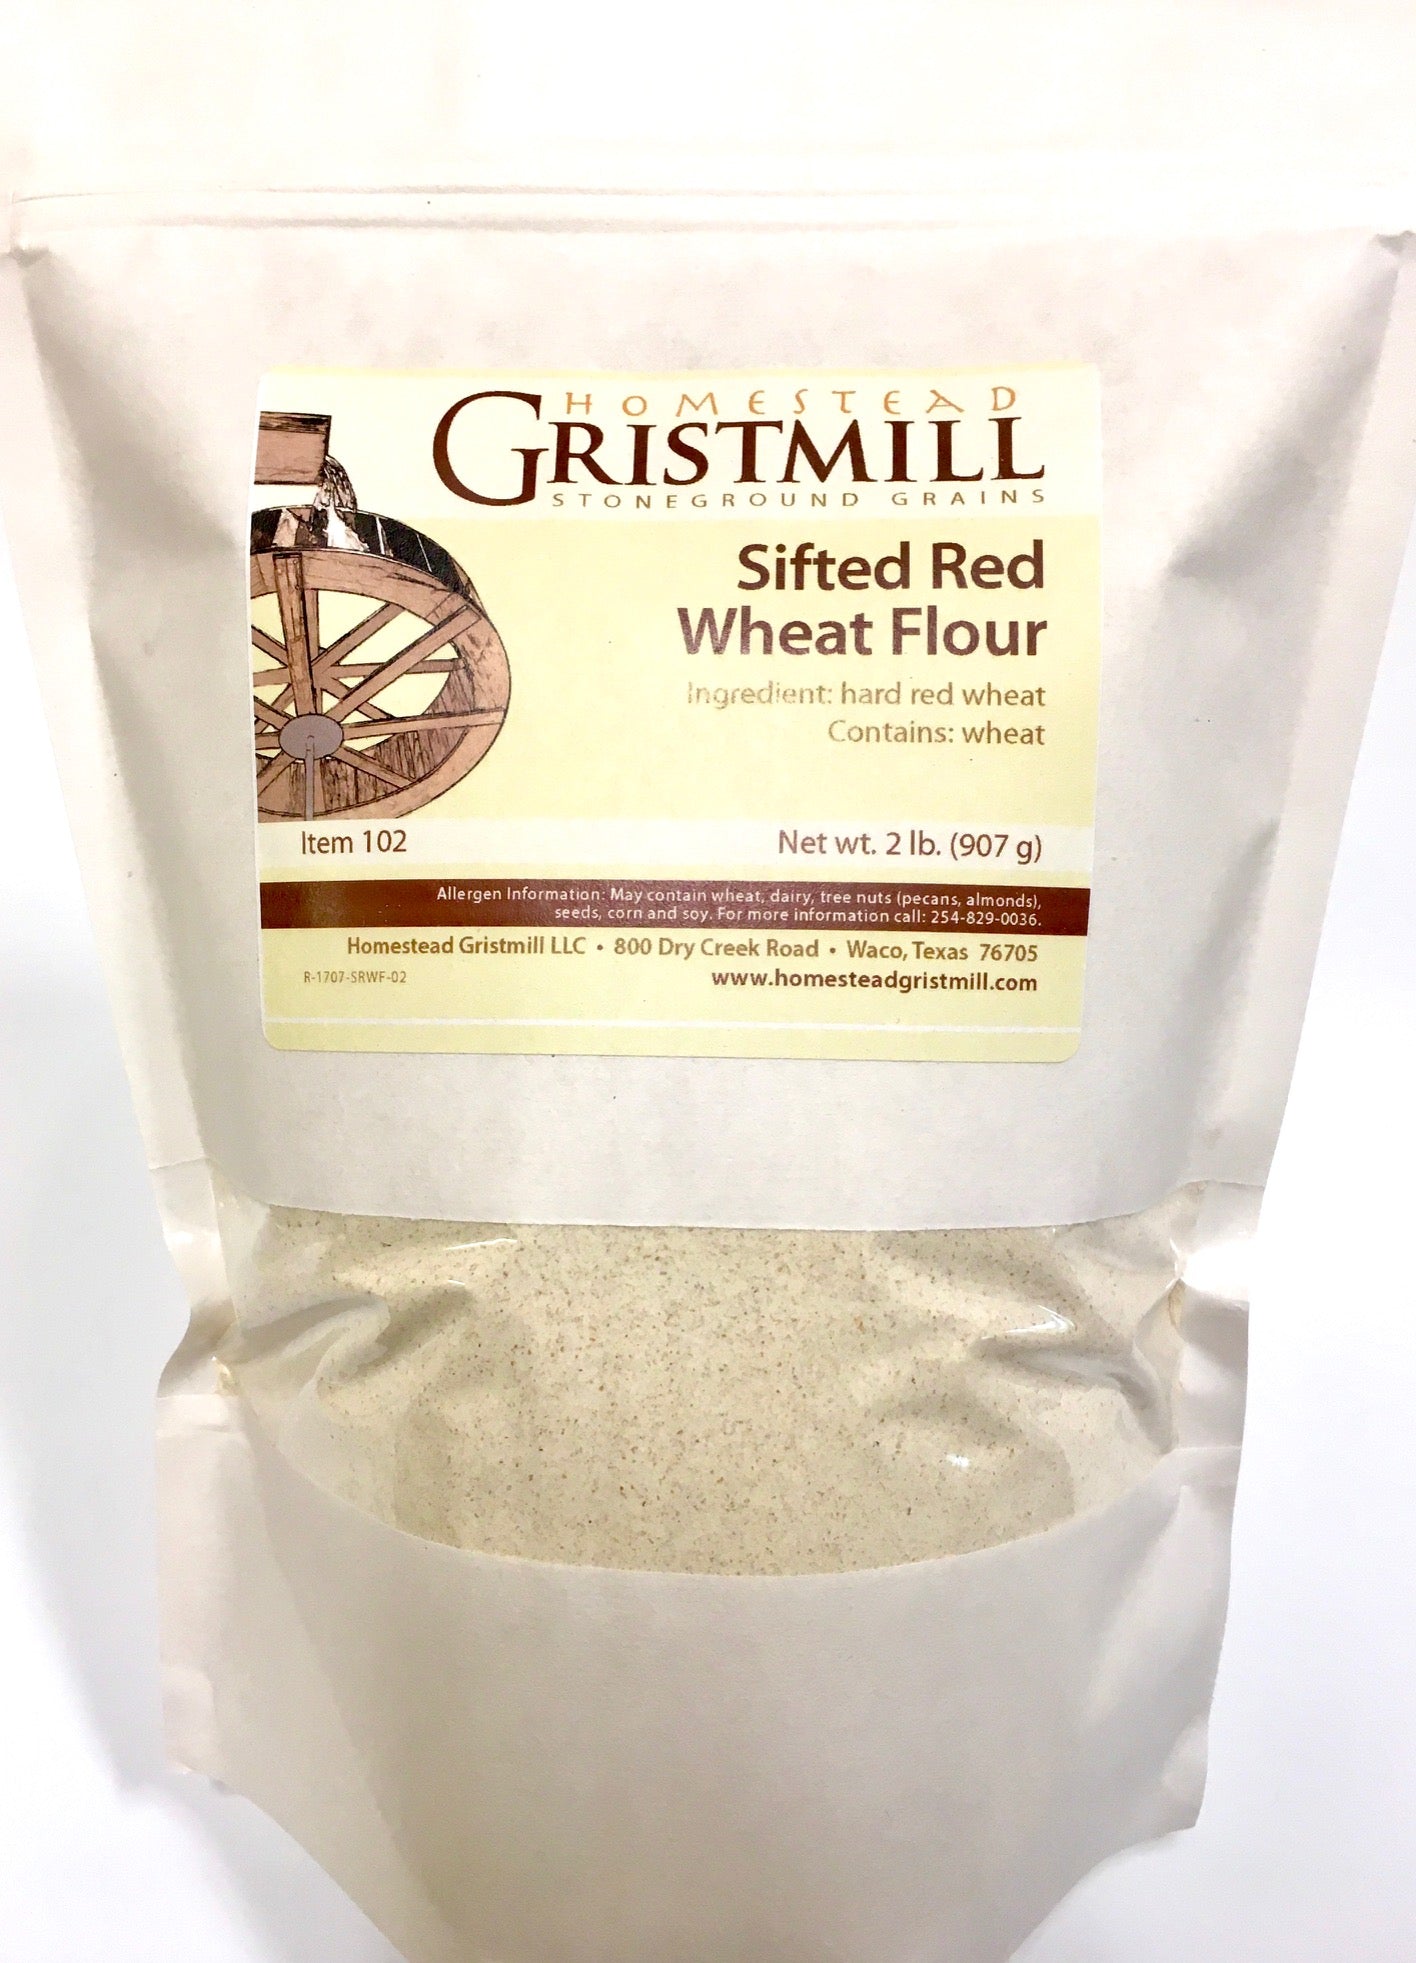 Stoneground Sifted Red Wheat Flour